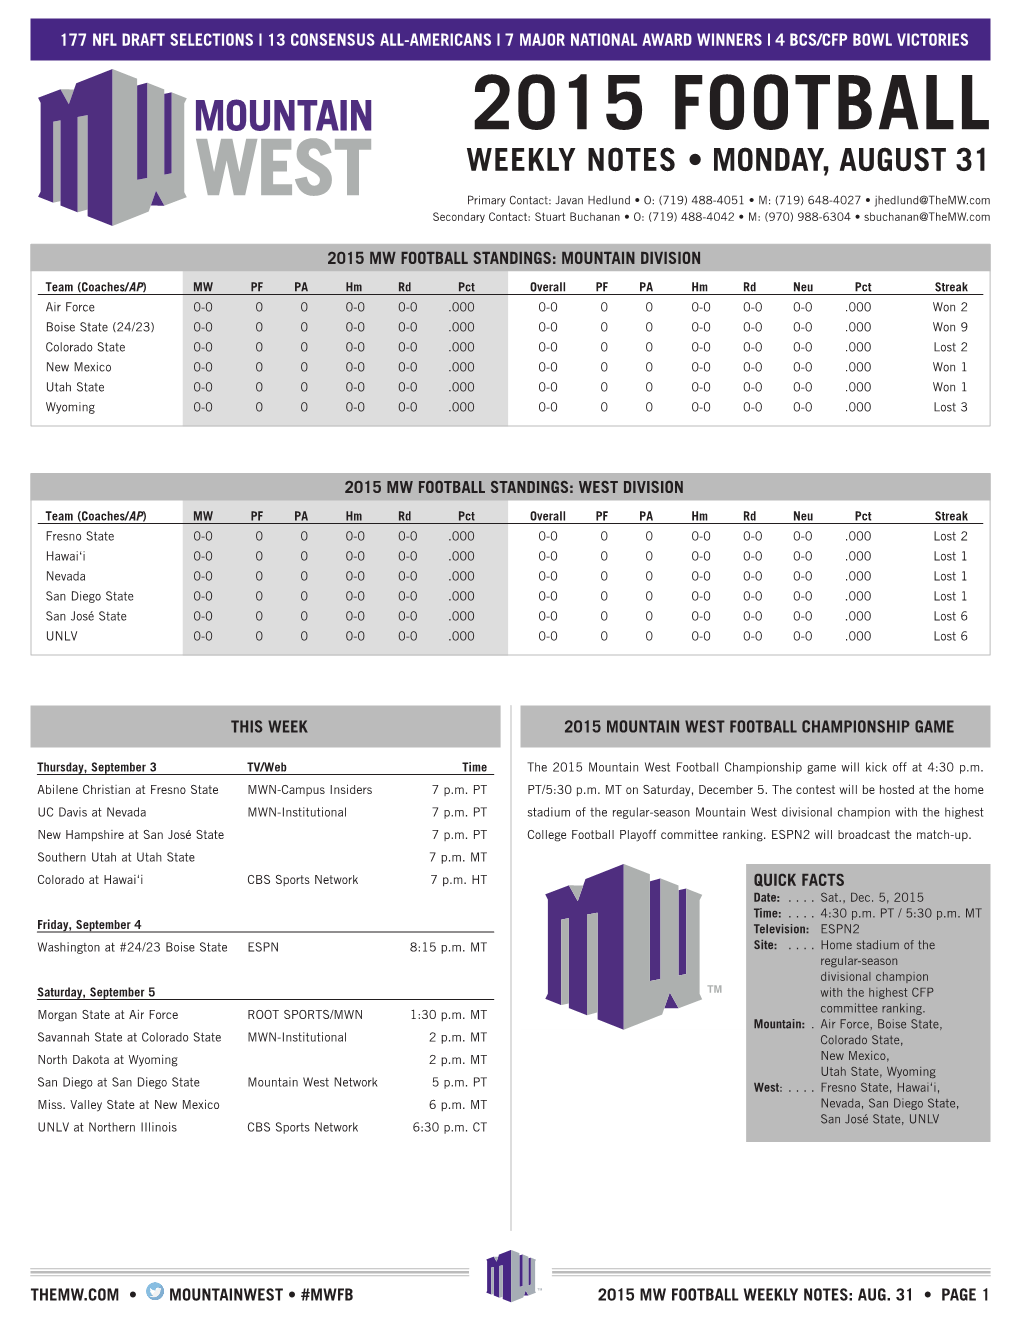 2015 Football Weekly Notes • Monday, August 31